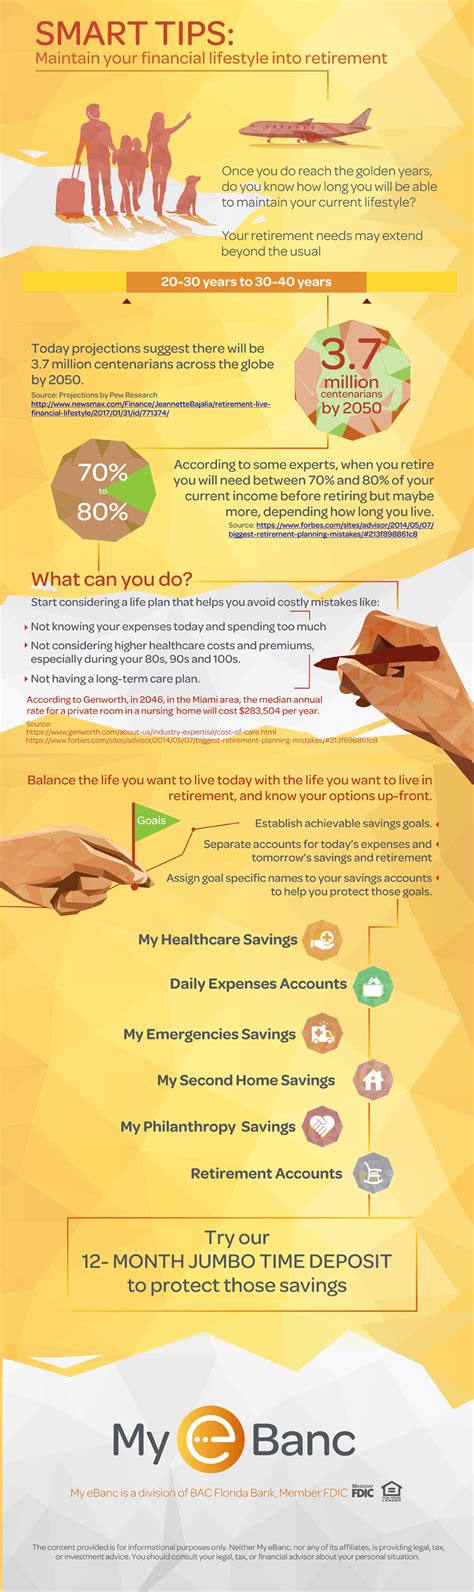 Infographic Maintain Your Financial Lifestyle Into Retirement My Ebanc